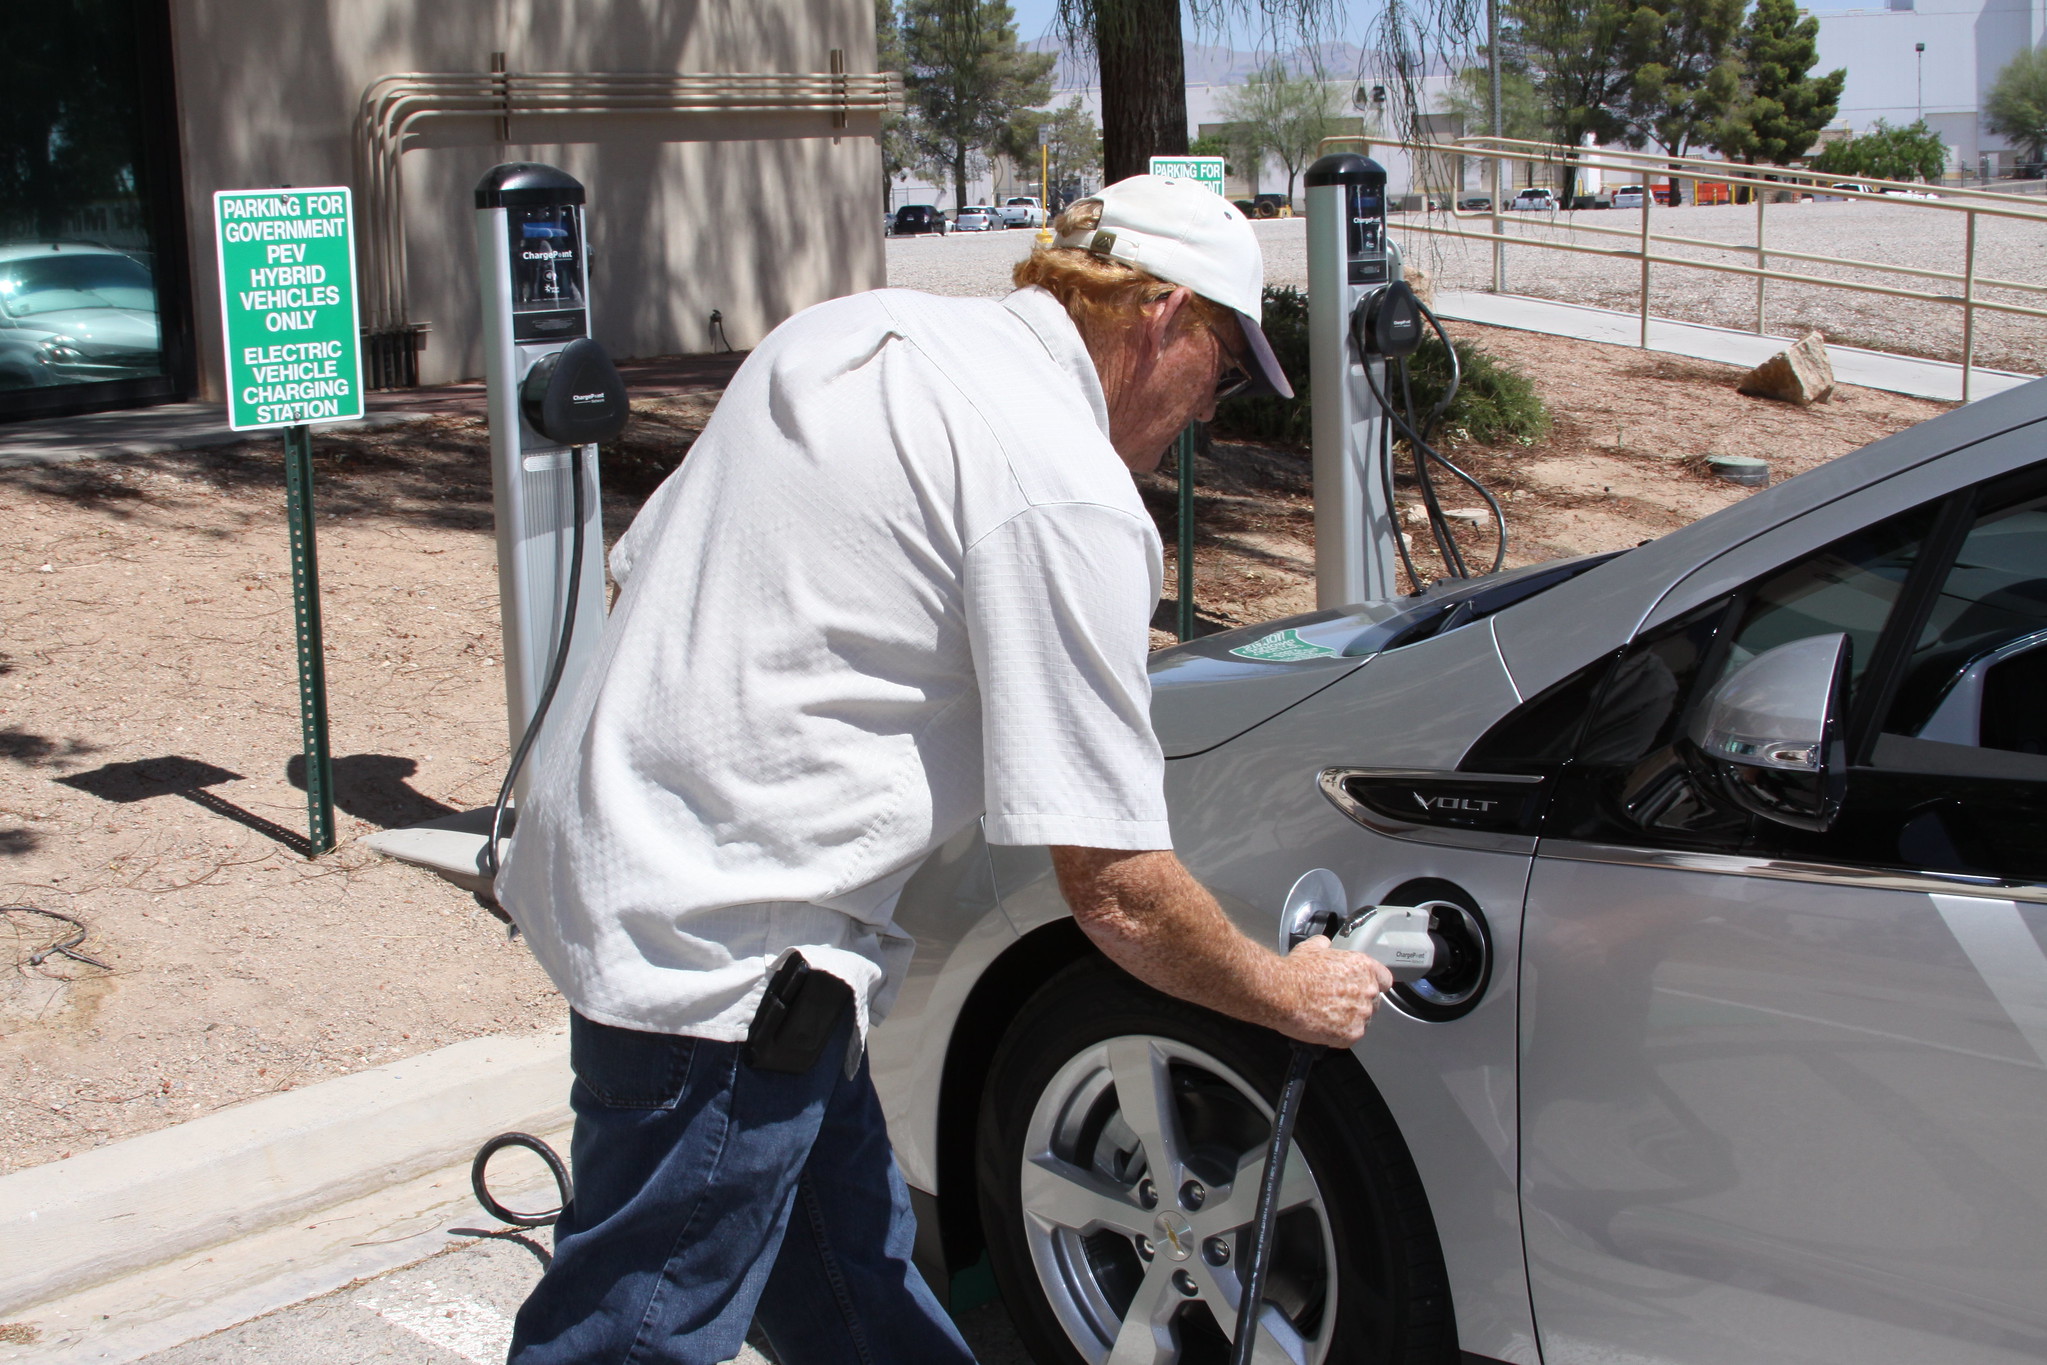 Electric vehicles a boon for Nevada’s economy, workers and environment, say groups